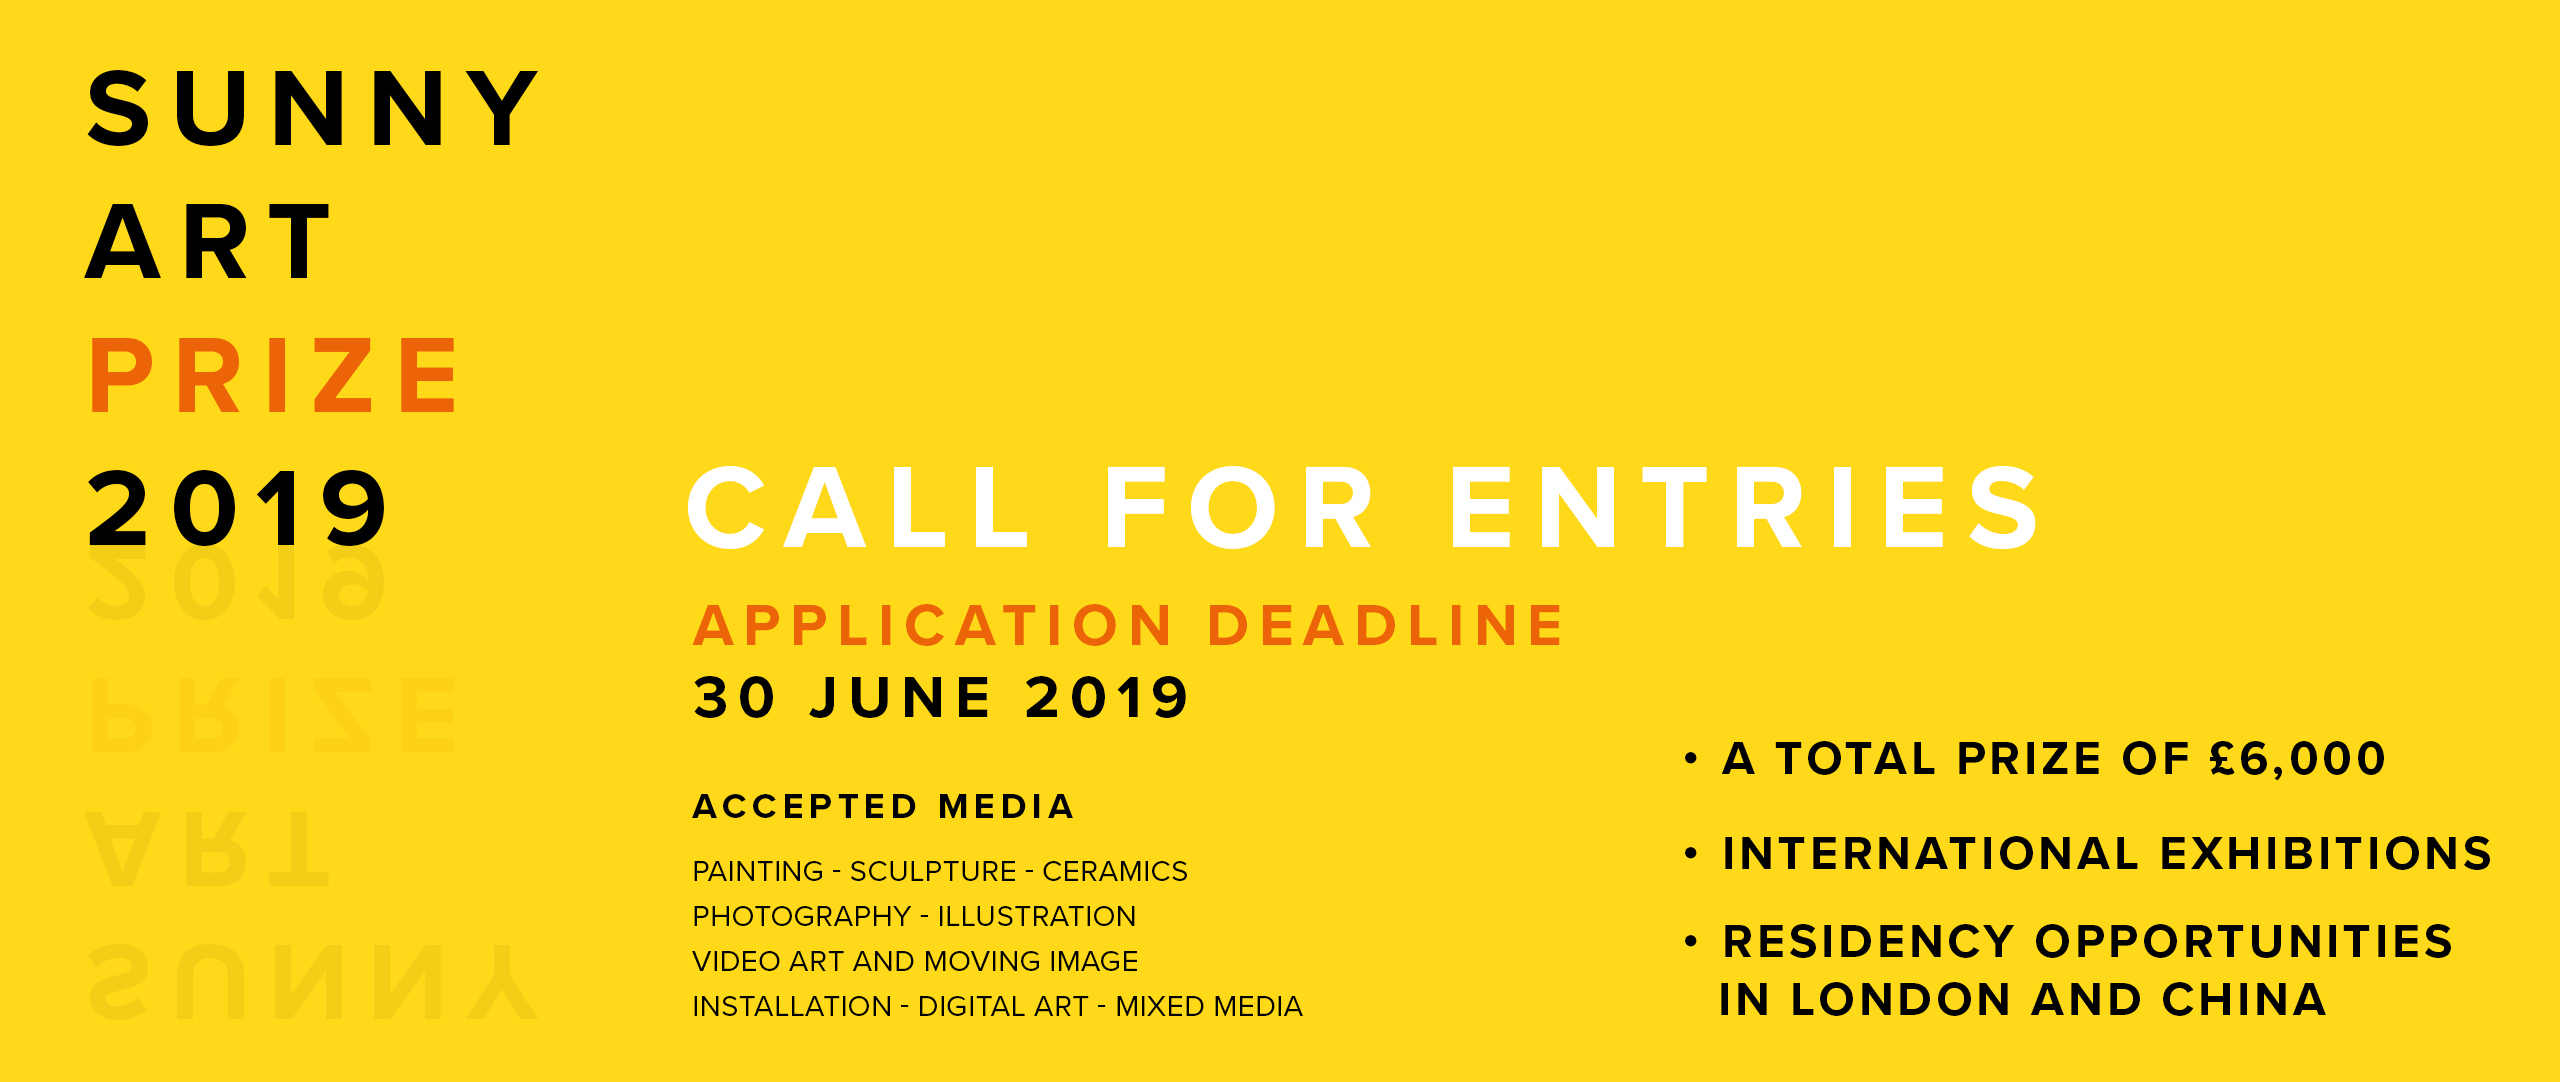 Sunny Art Prize 2019: Call For Artists by Mario Zucchelli - Creative Work - $i